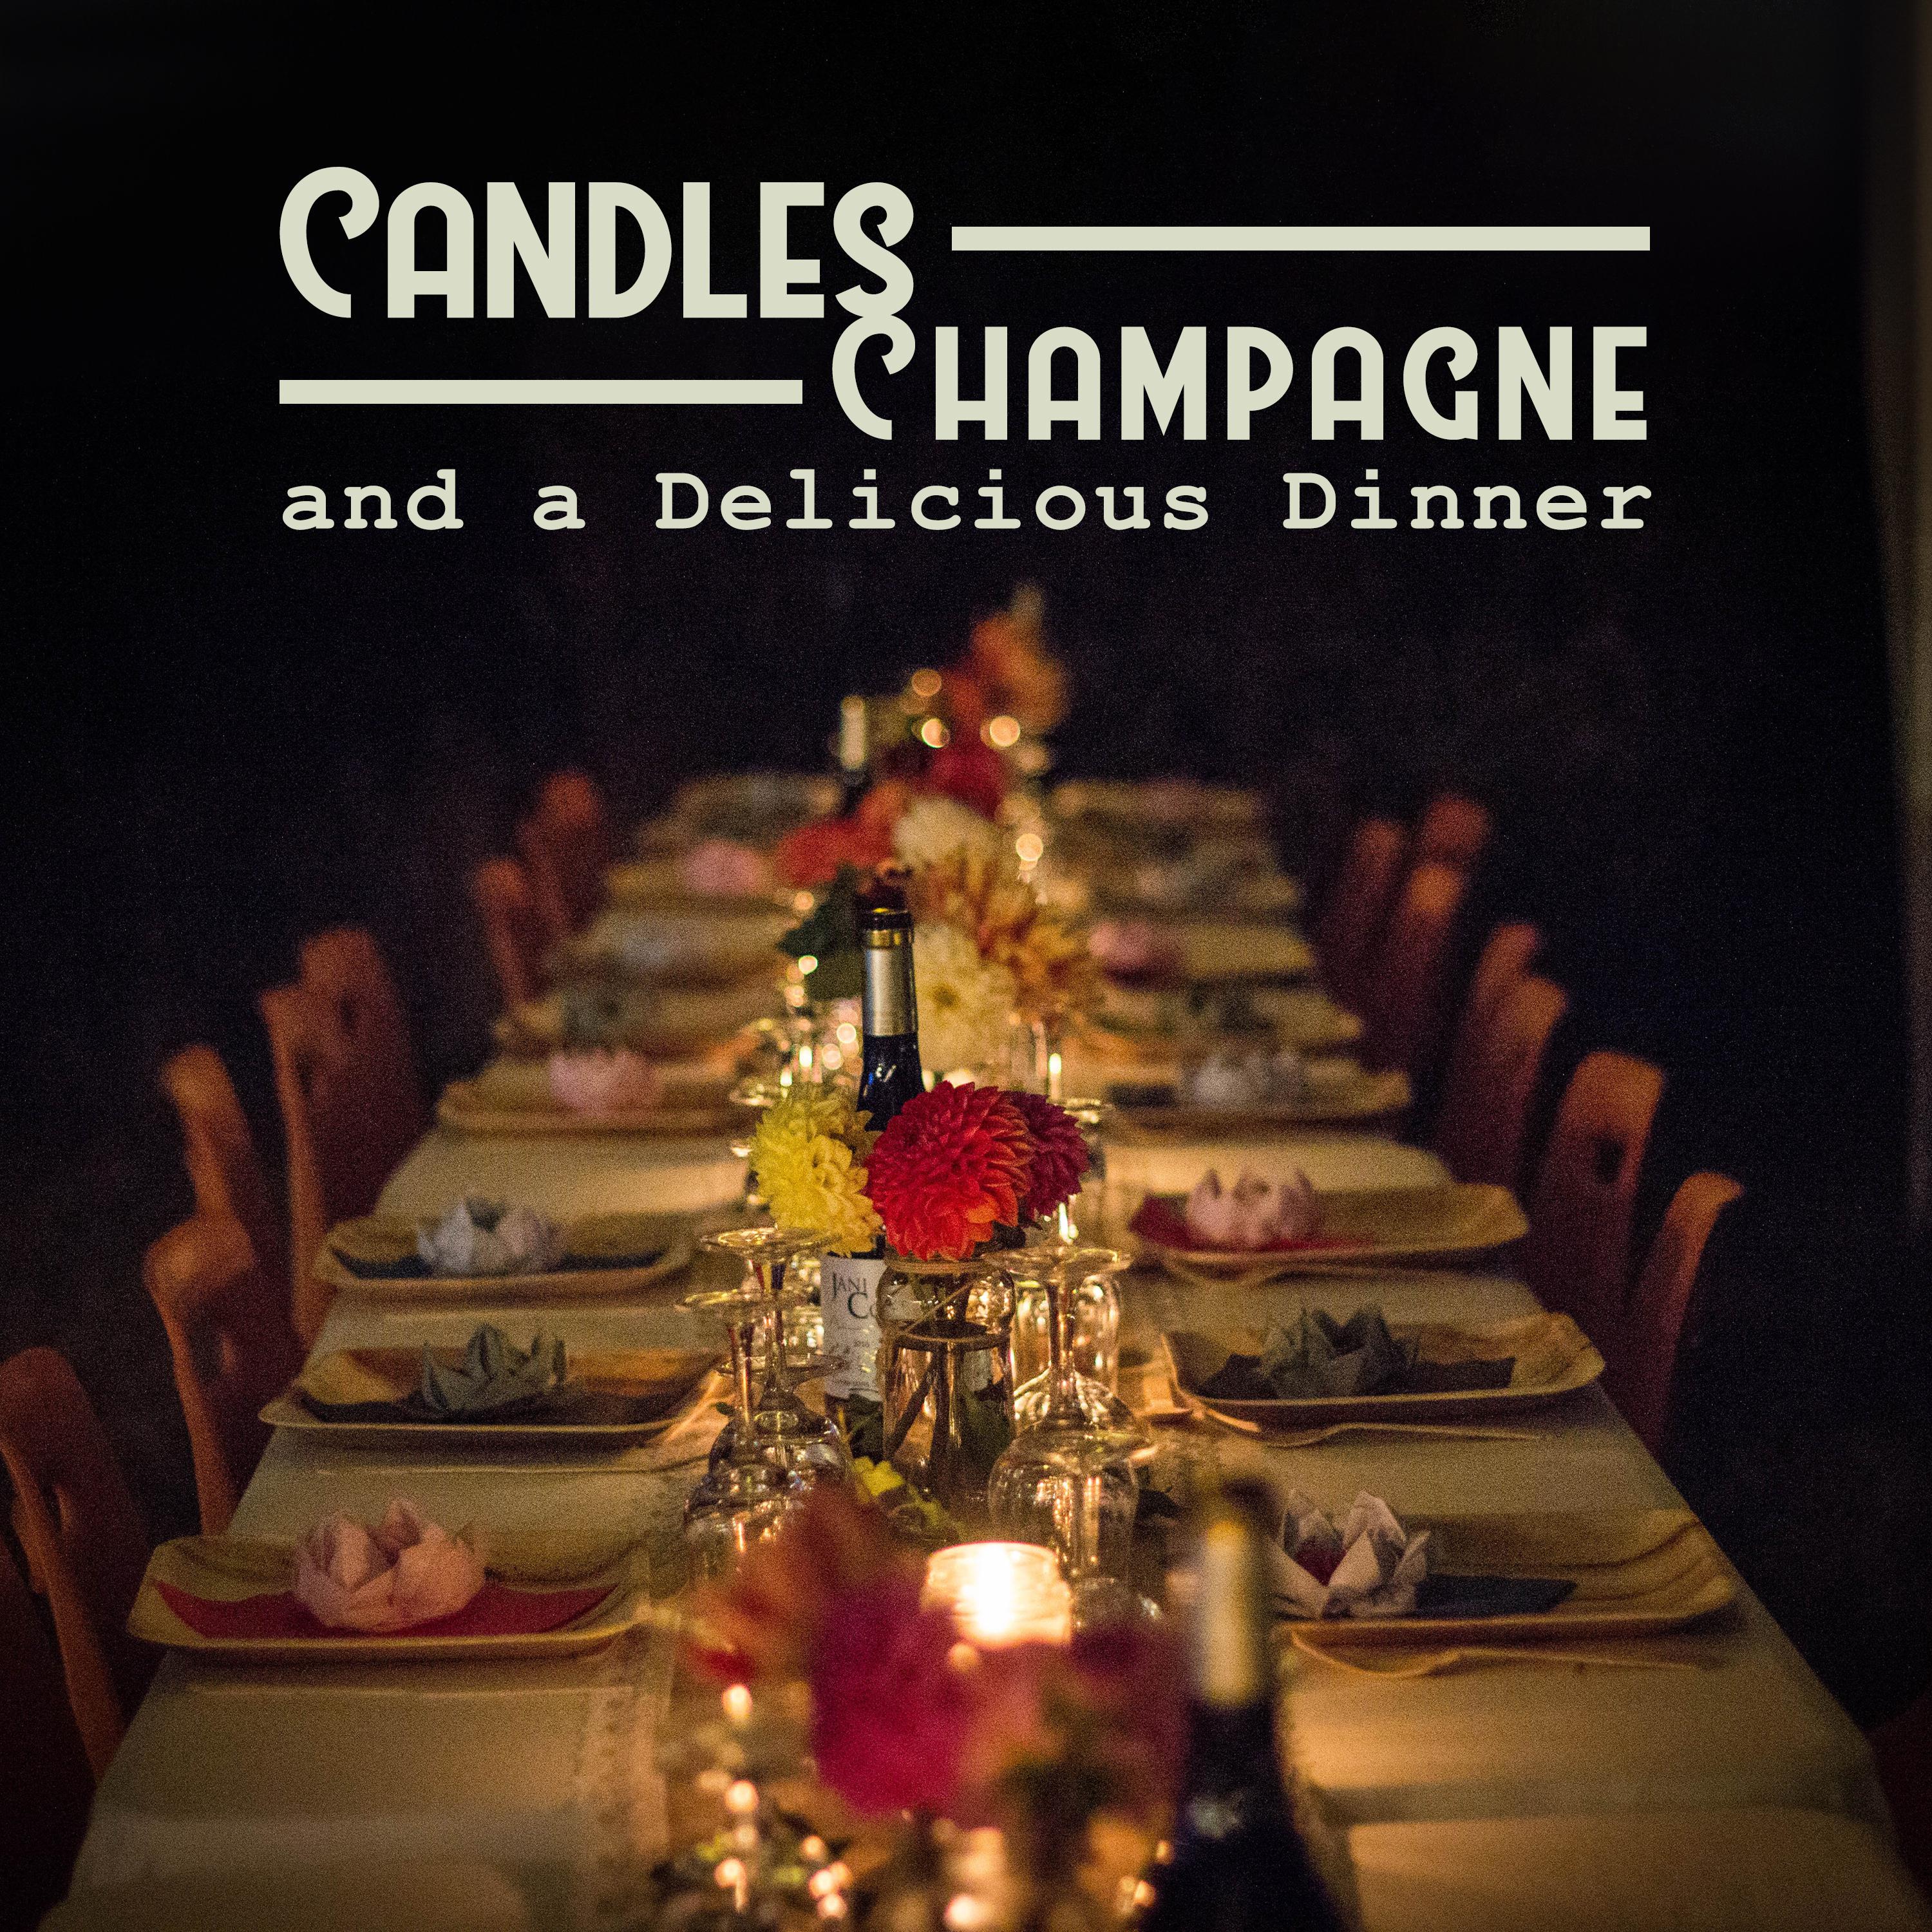 Candles, Champagne and a Delicious Dinner: 2019 Smooth Jazz Best Elegant Restaurant Music, Perfect Background for Romantic Dinner with Love, Good Food Eating & Wine Testing